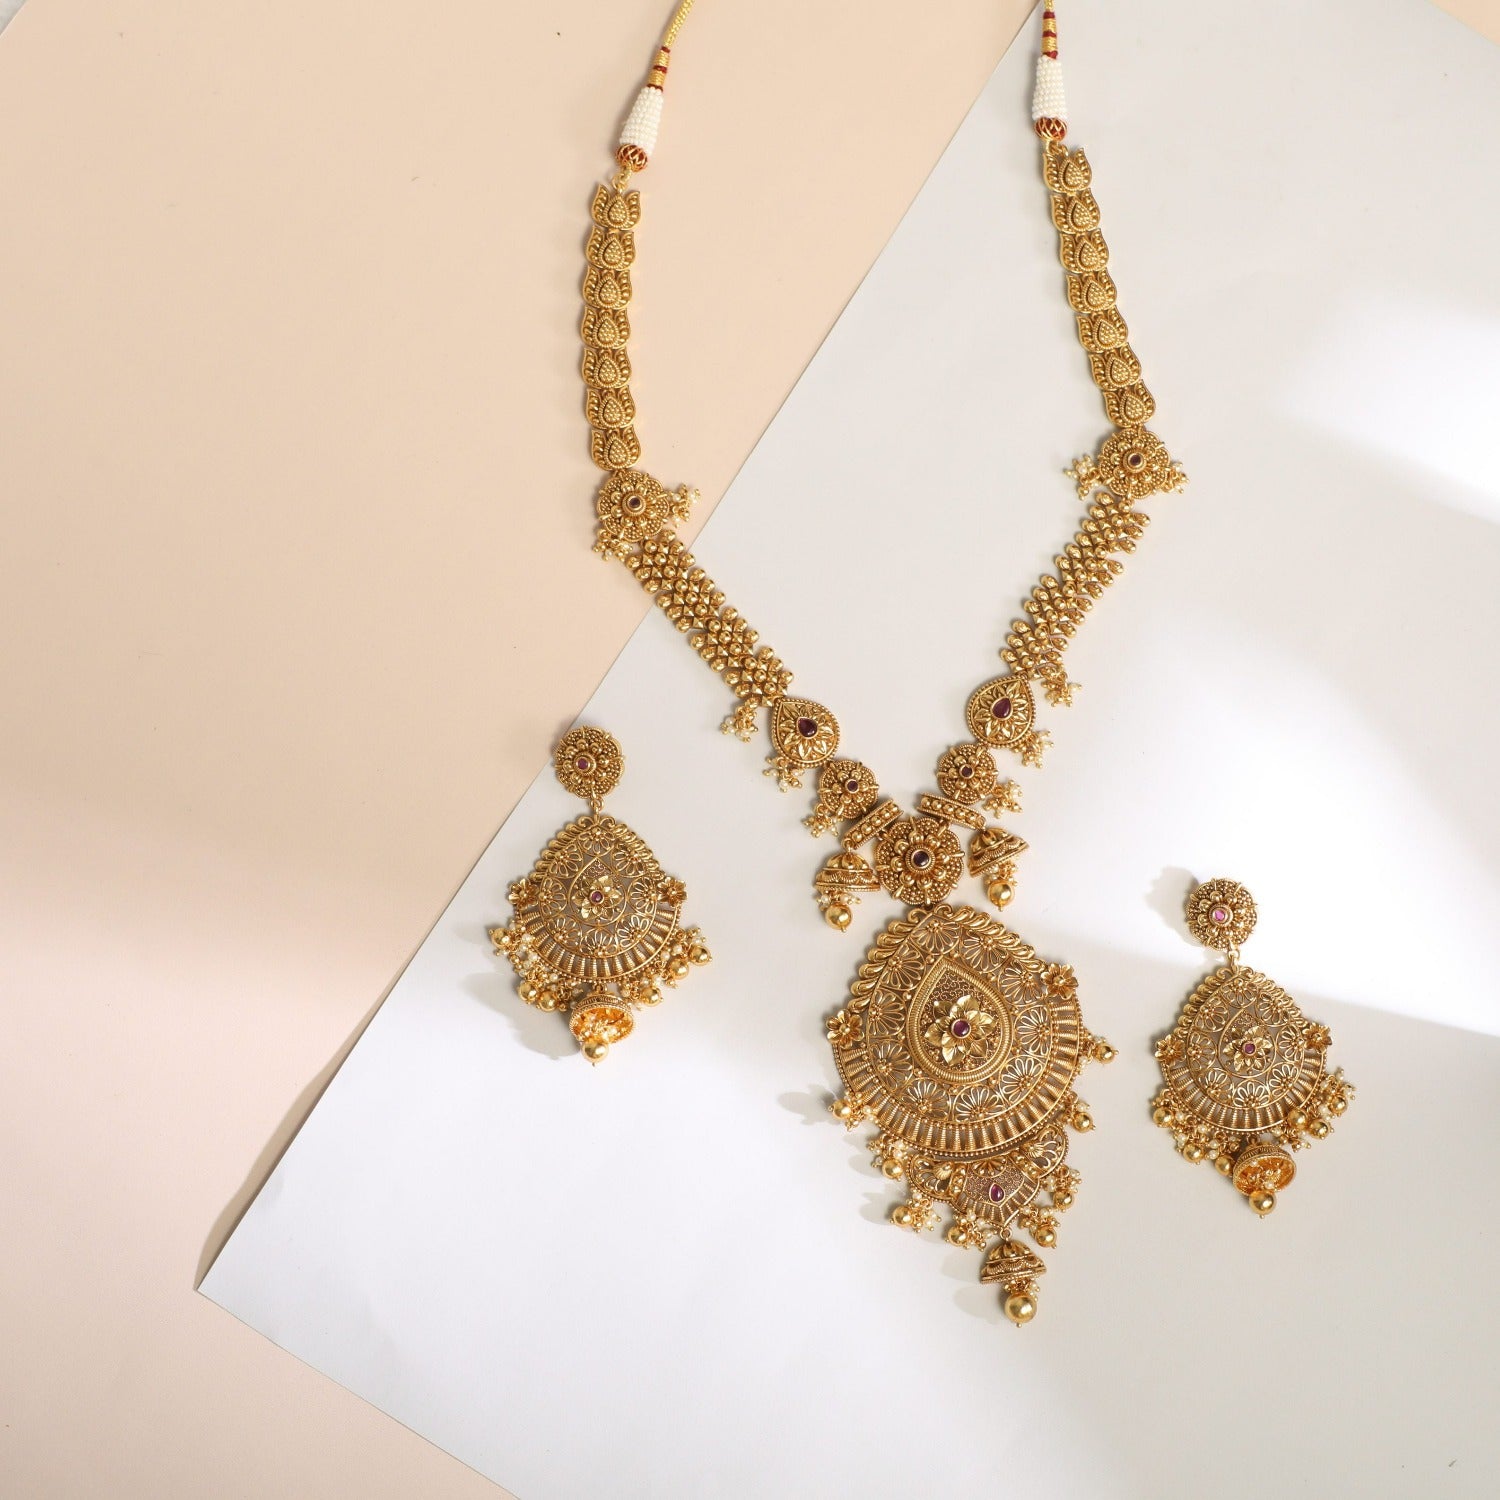 22K Gold 'Mango' Long Necklace & Earrings Set with Ruby, Emerald & Japanese  Culture Pearls(Temple Jewellery) - 235-GS3137 in 112.700 Grams